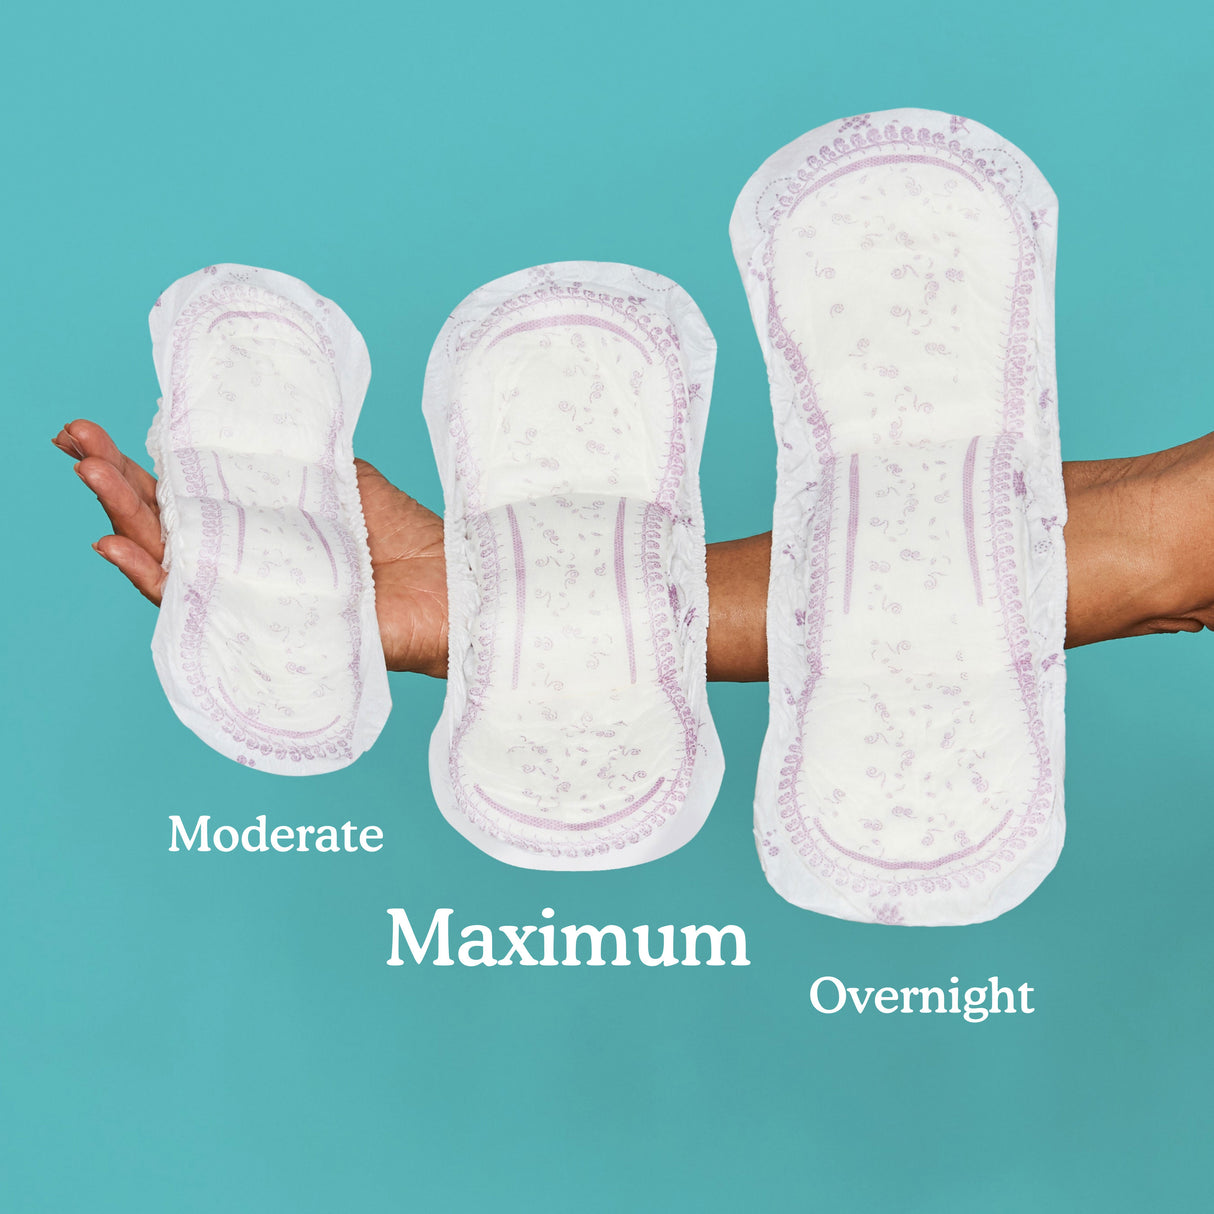 Woman holding 3 sizes of pads in her arm with maximum being the absorbency between moderate and overnight